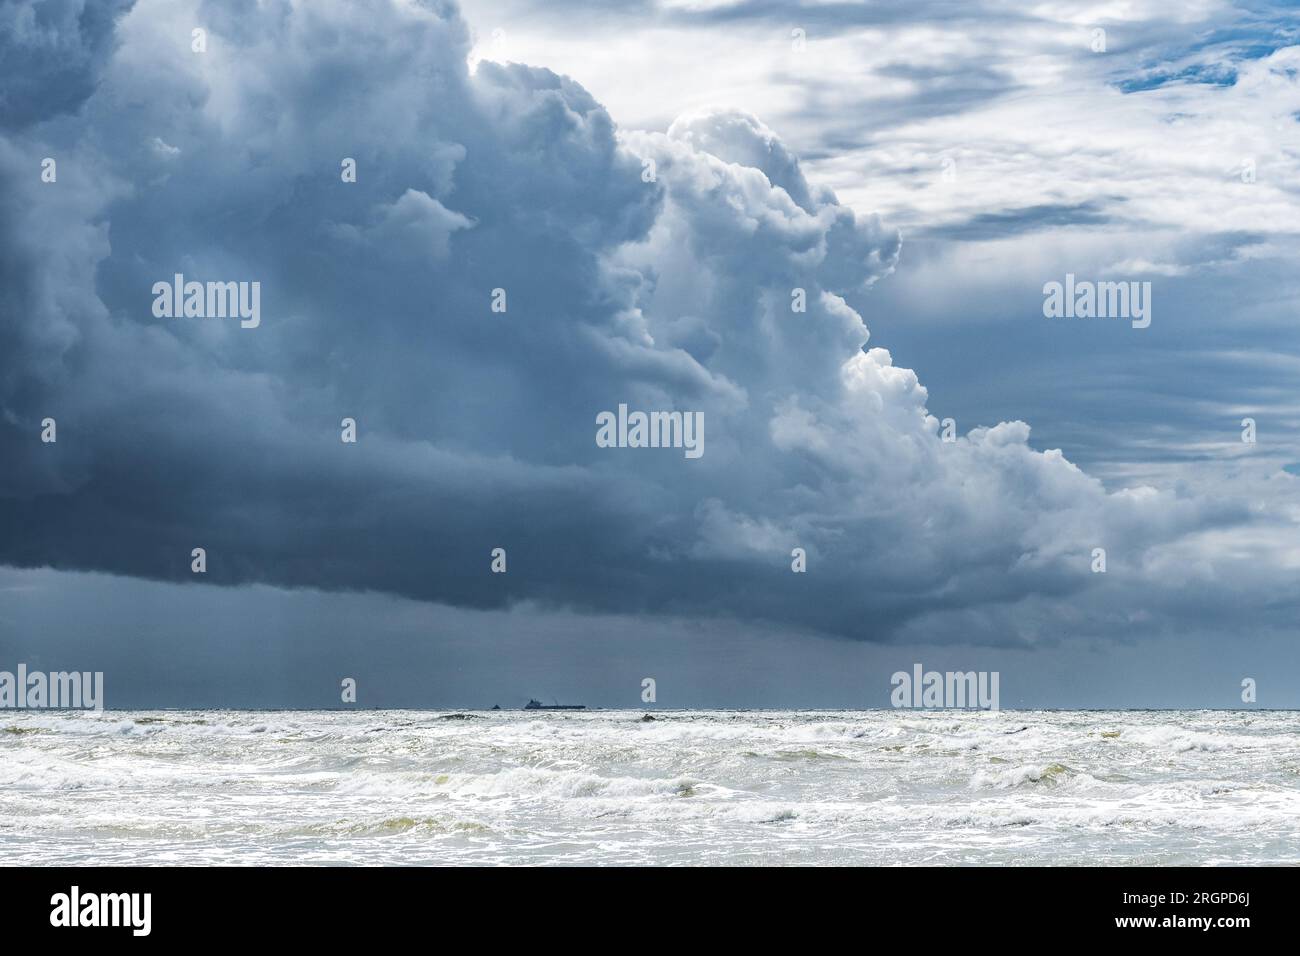 Beautiful rough sea with big waves, and dramatic cloudy sky with big dark clouds before the storm and rain Stock Photo